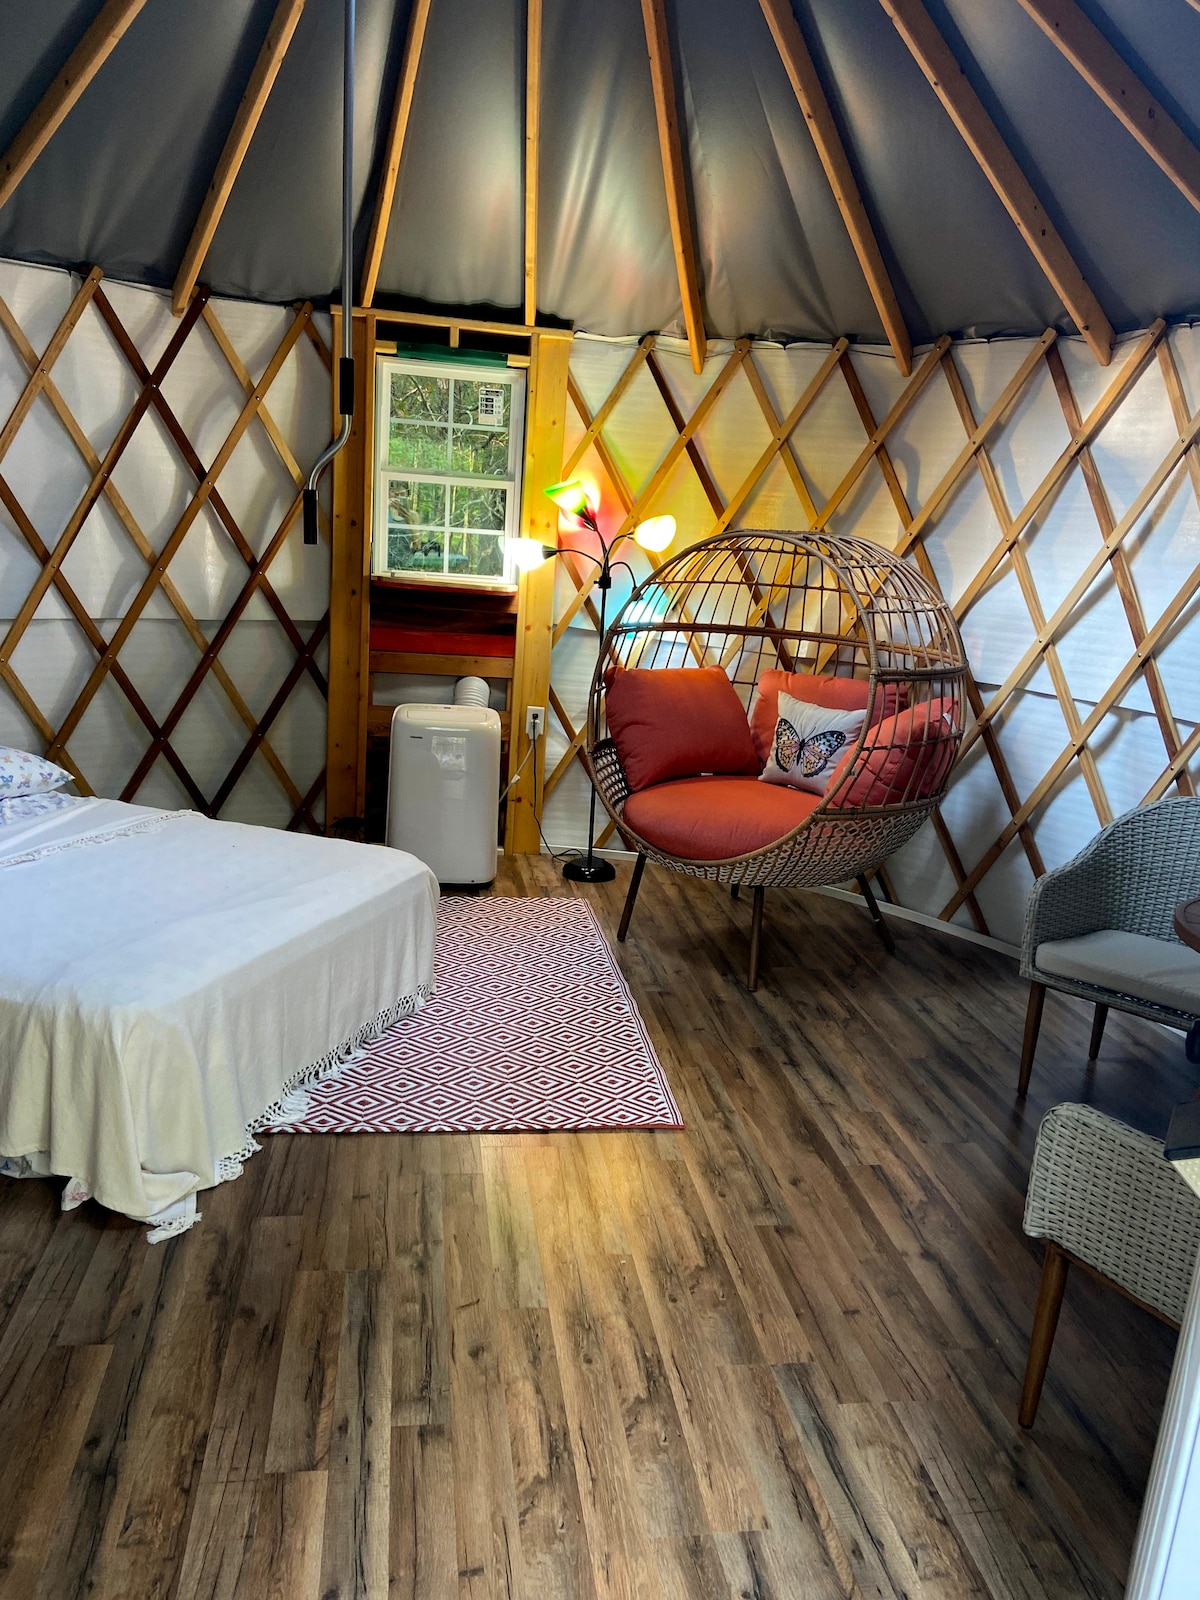 The Butterfly Yurt at River Bark